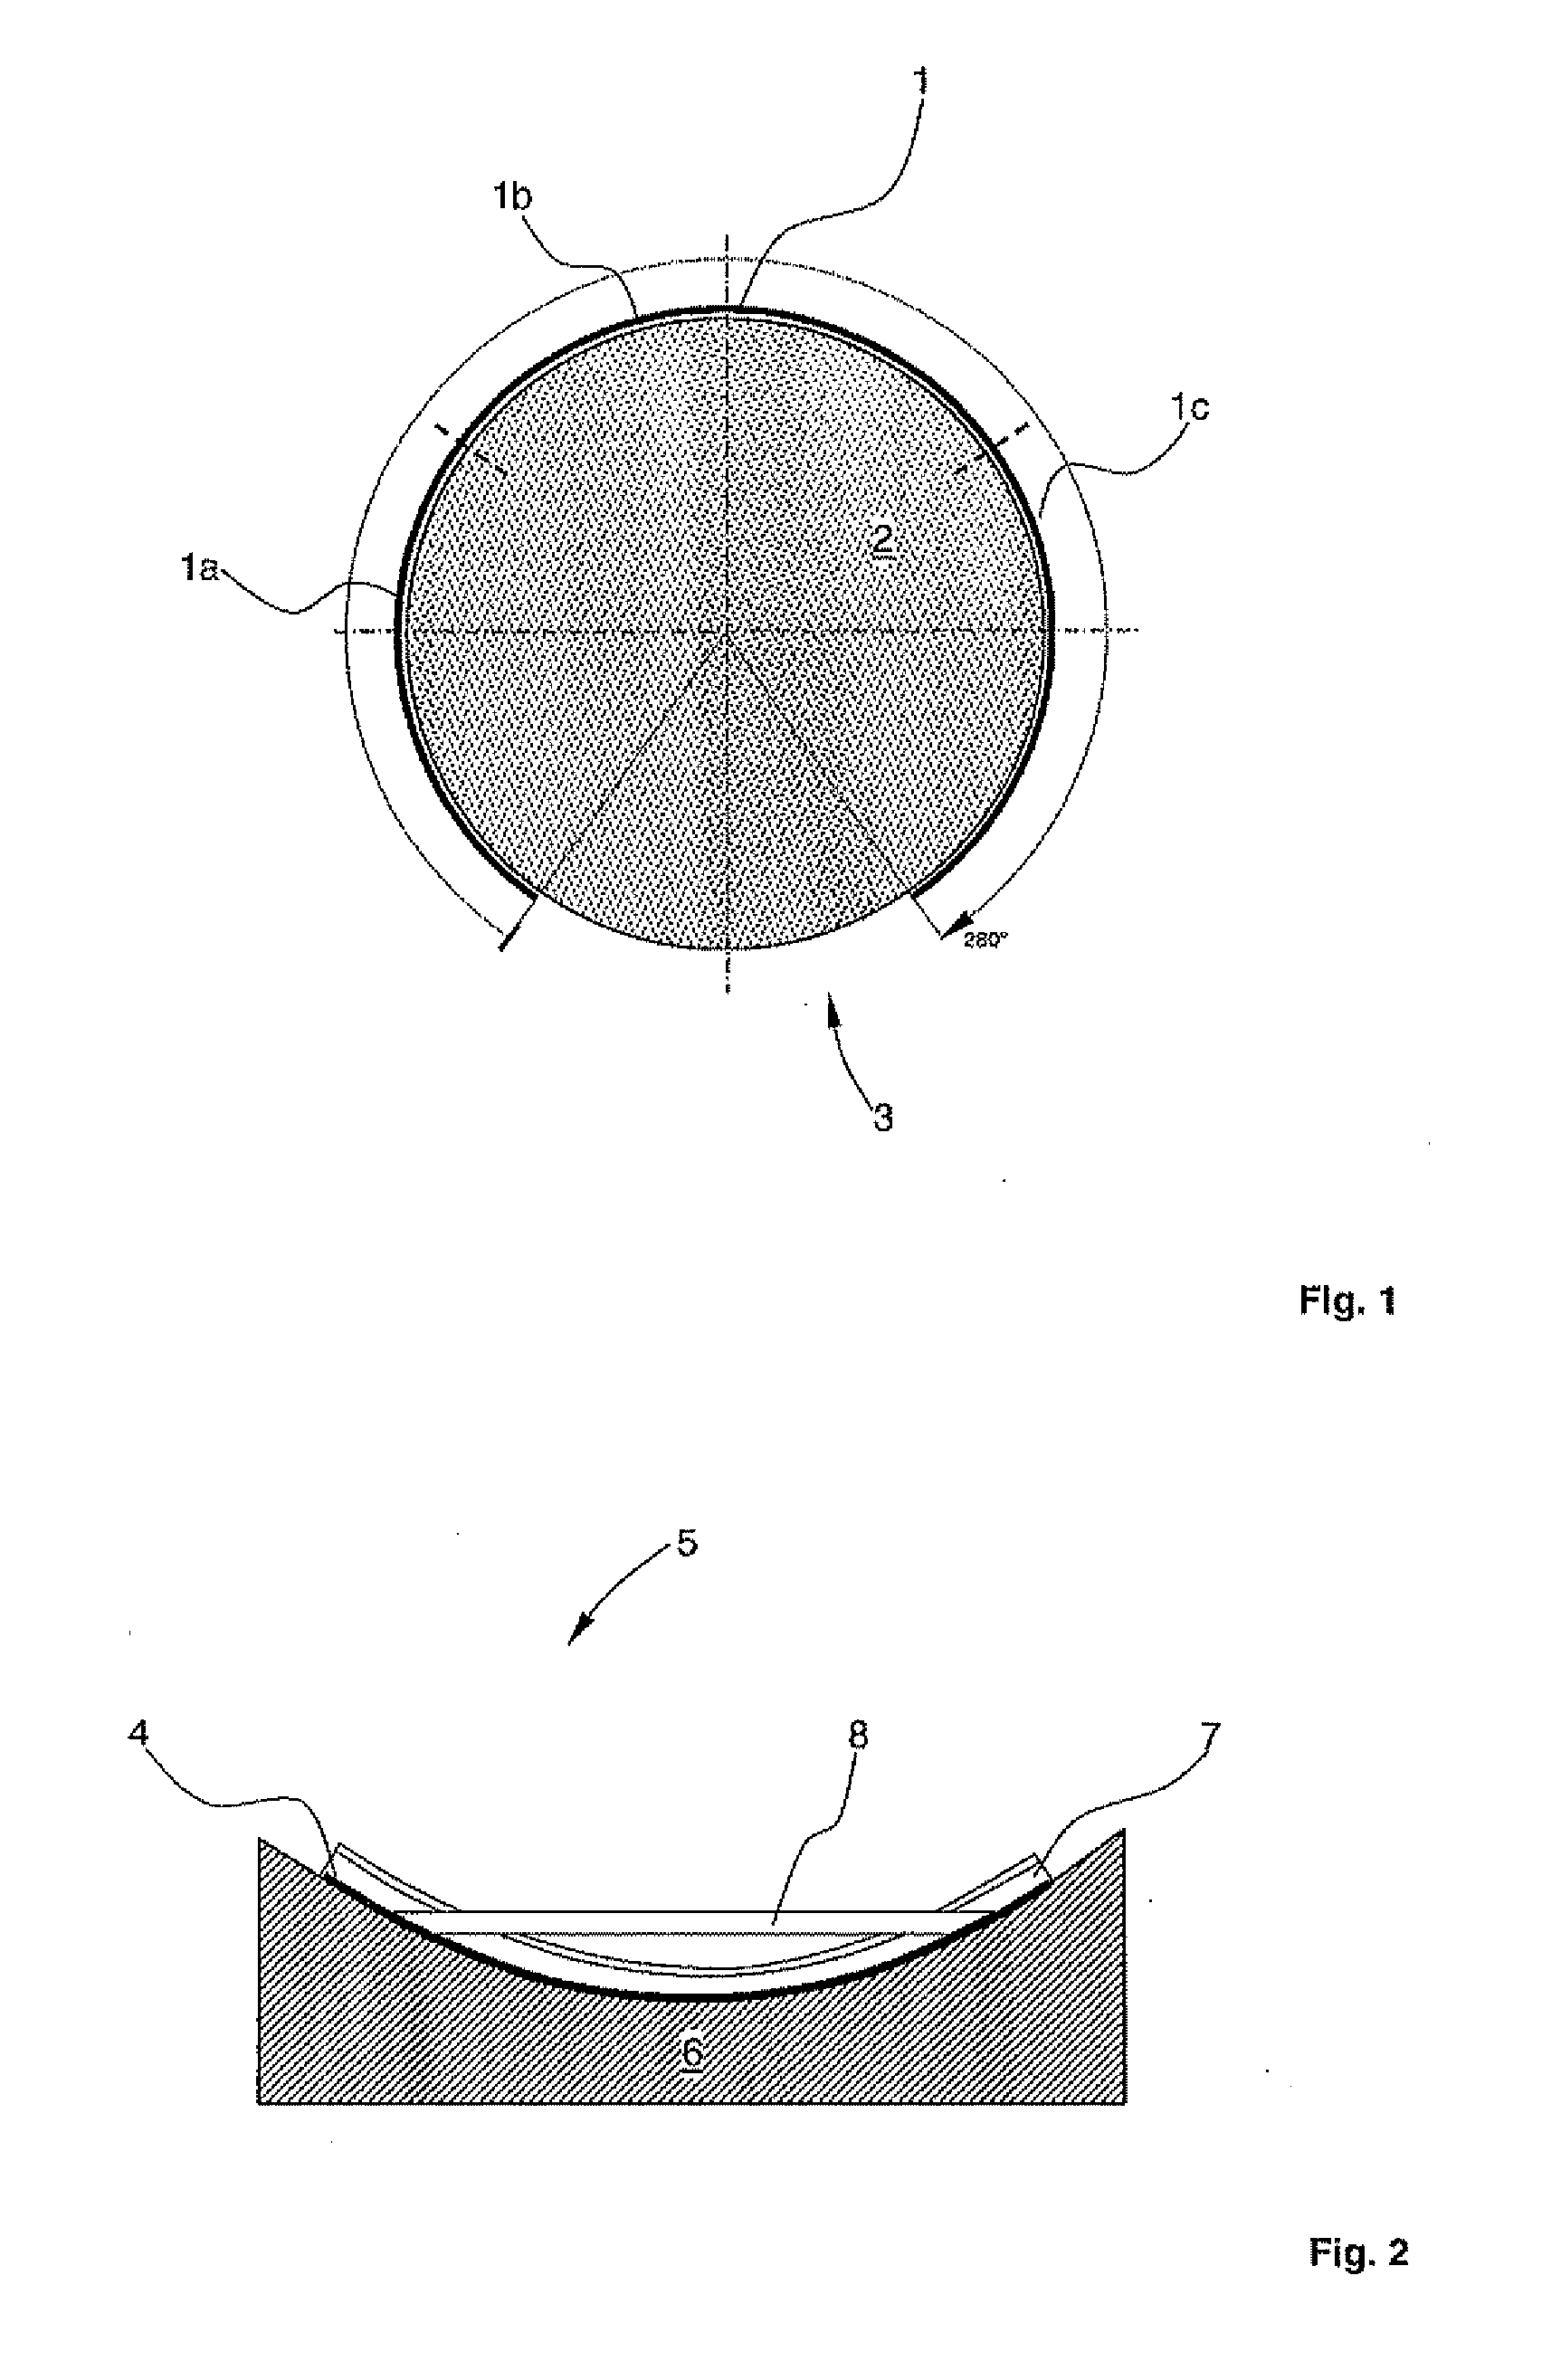 Method for producing a fuselage airframe of an aircraft